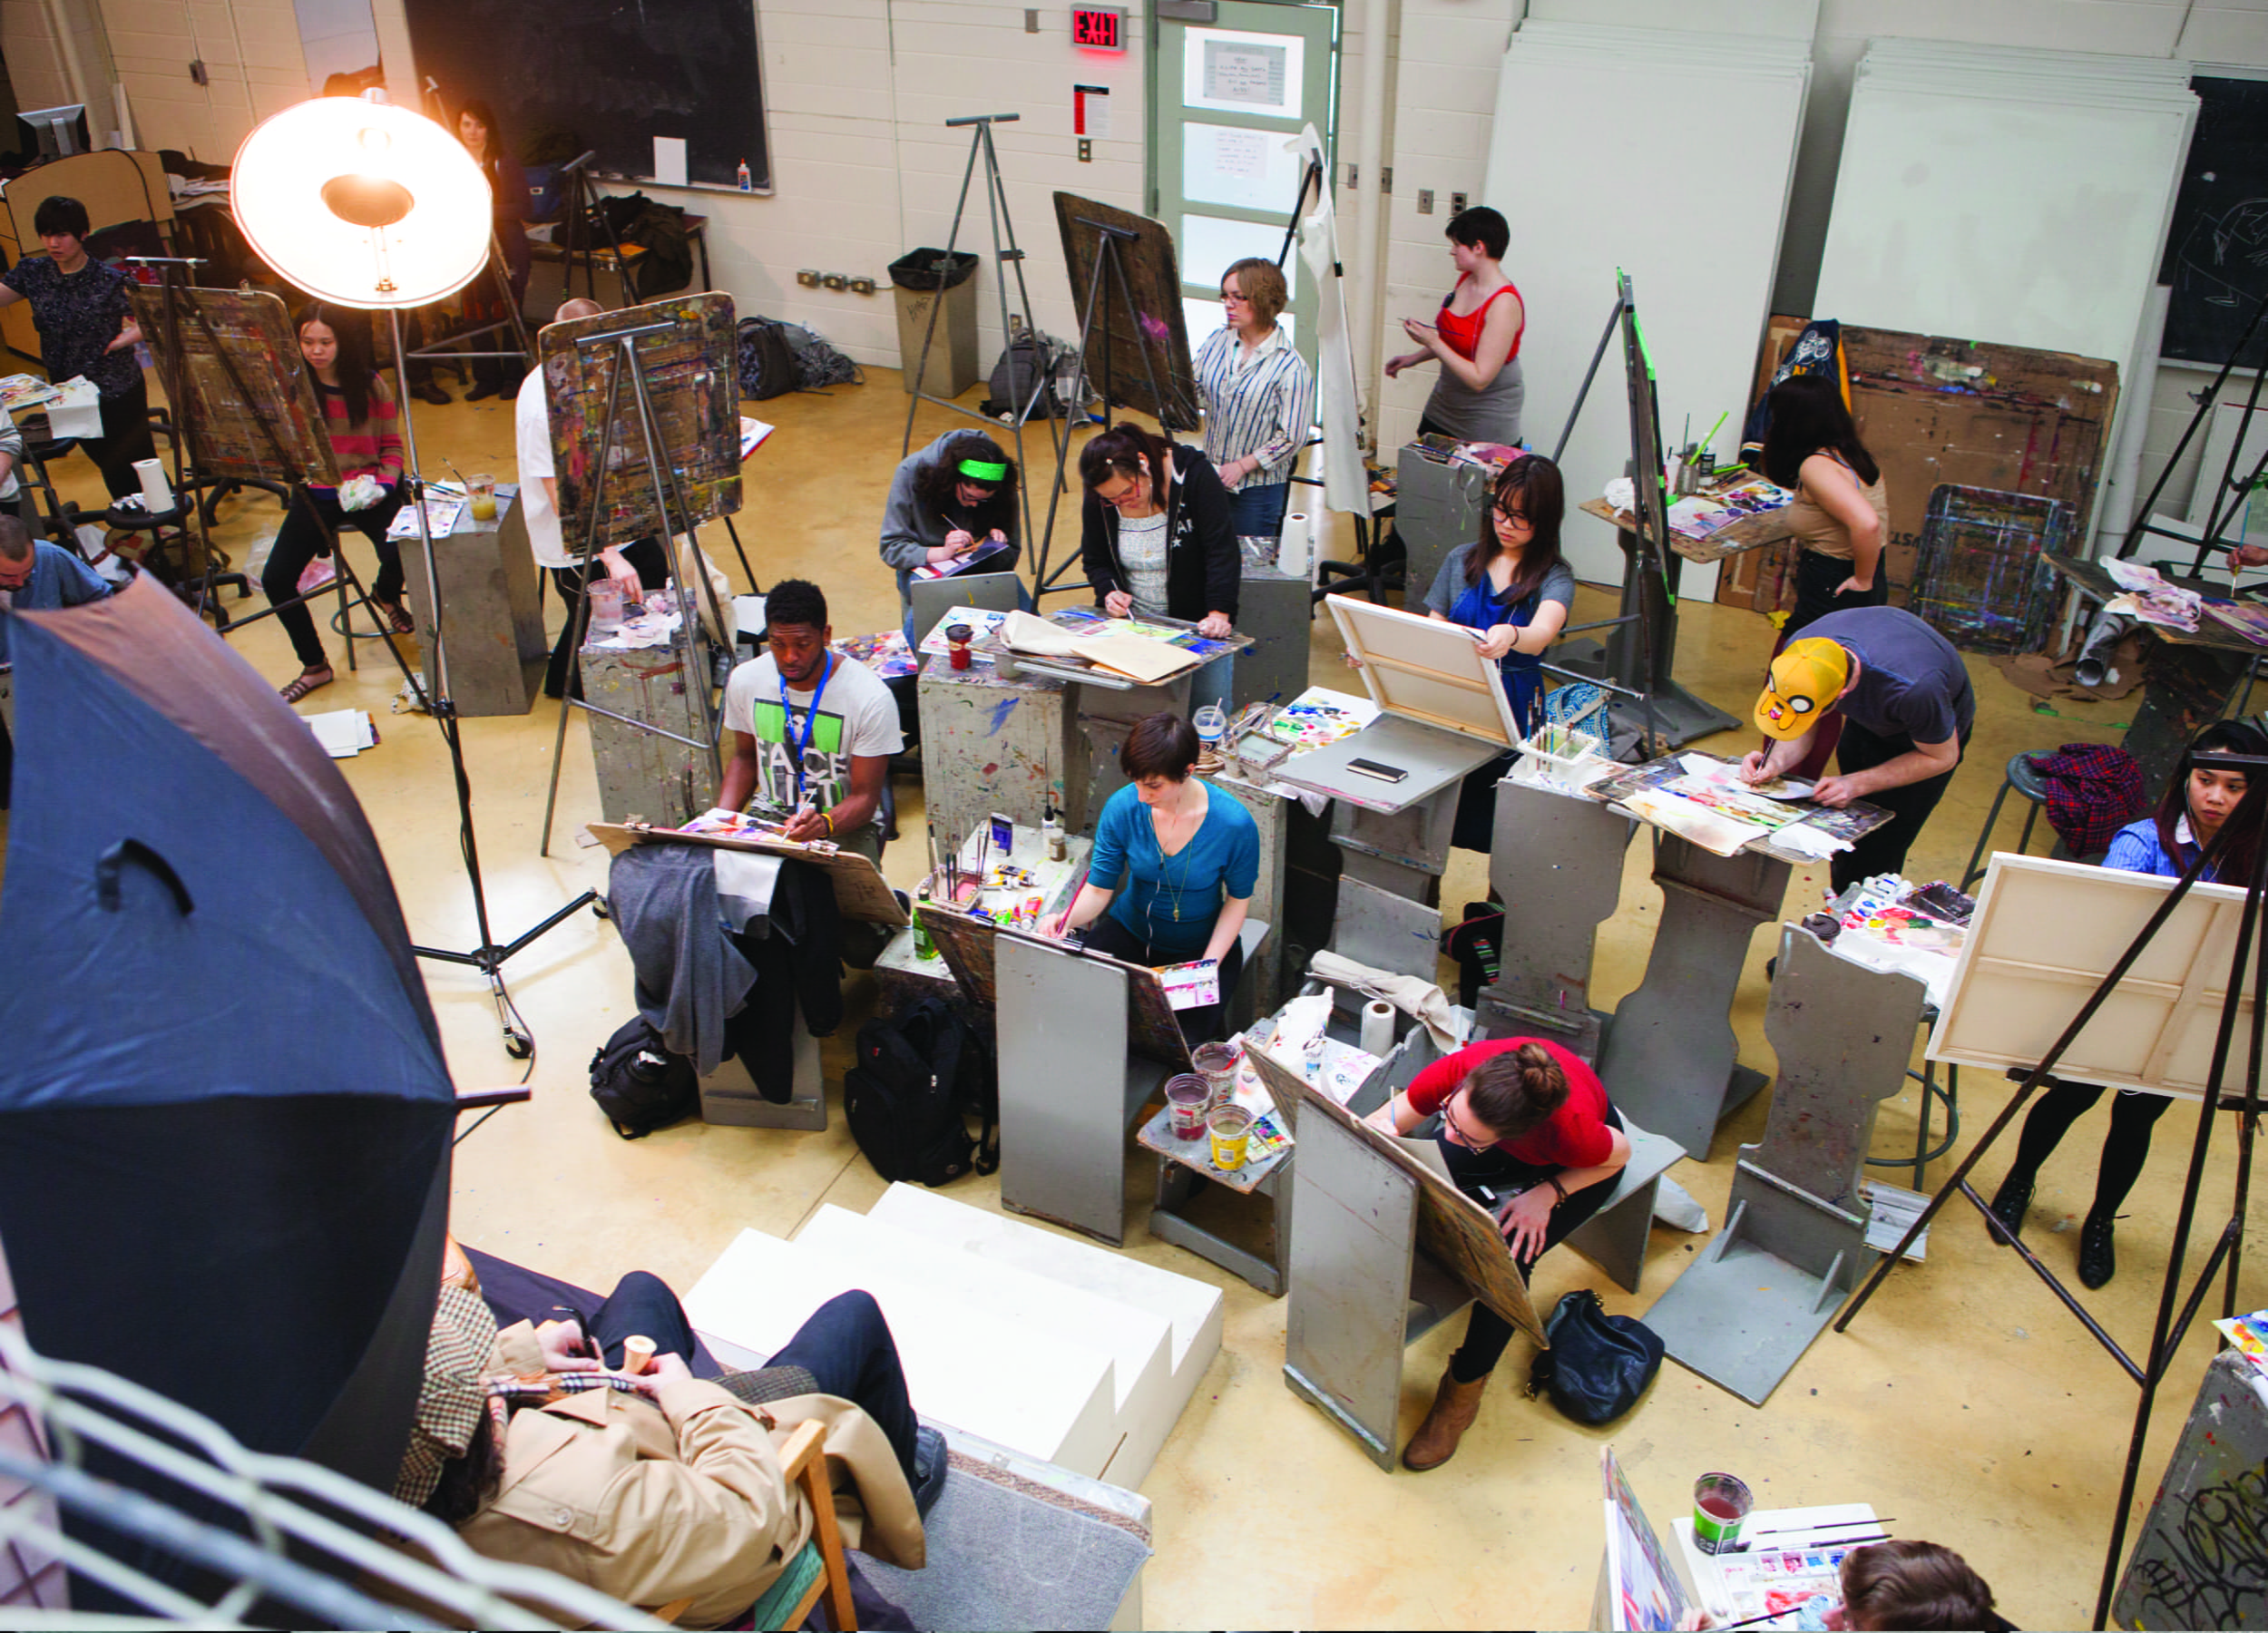 Illustration students working in a studio